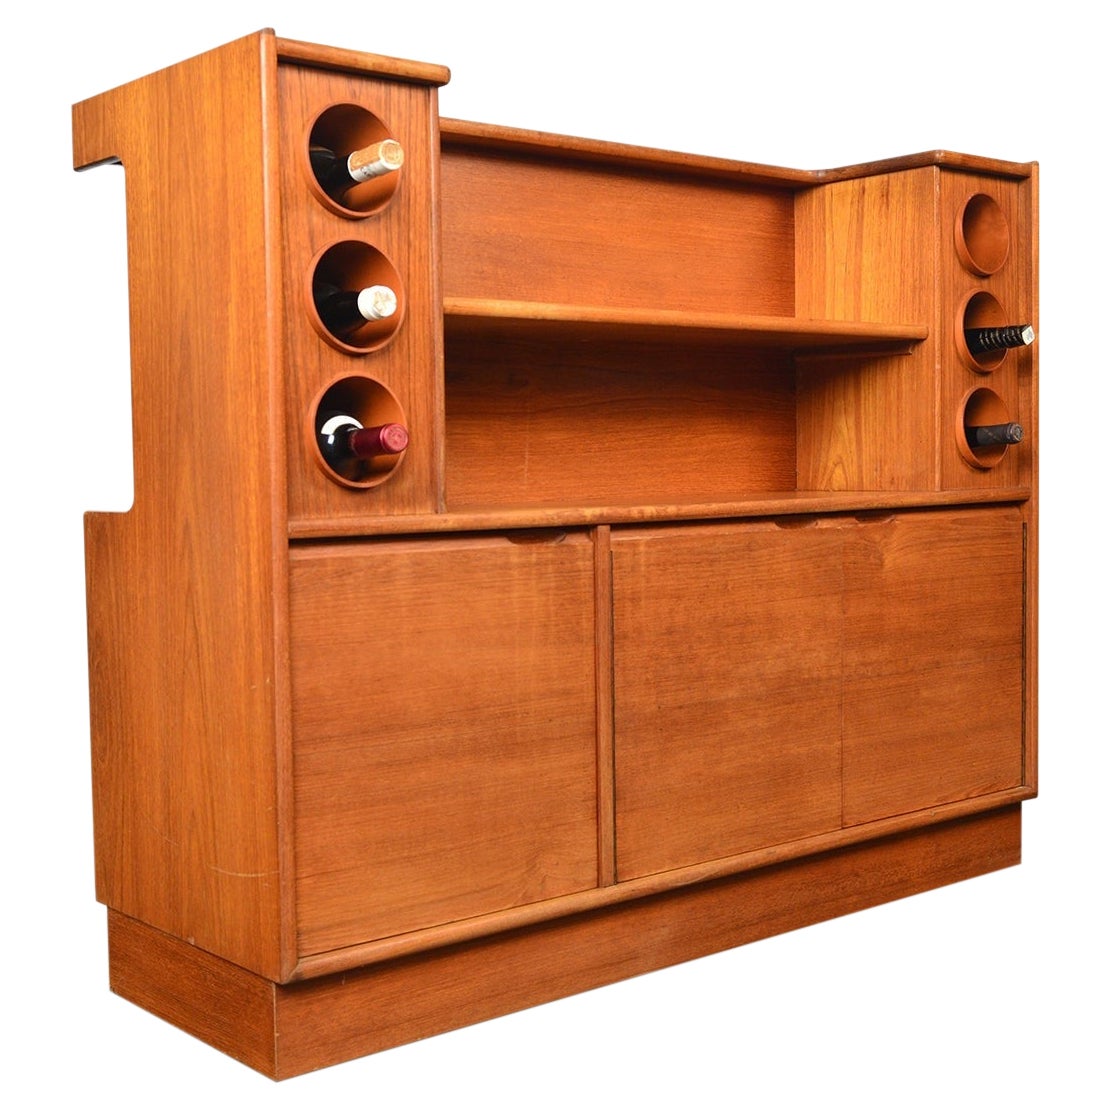 Freestanding Teak Cocktail Bar With White Laminate Top For Sale